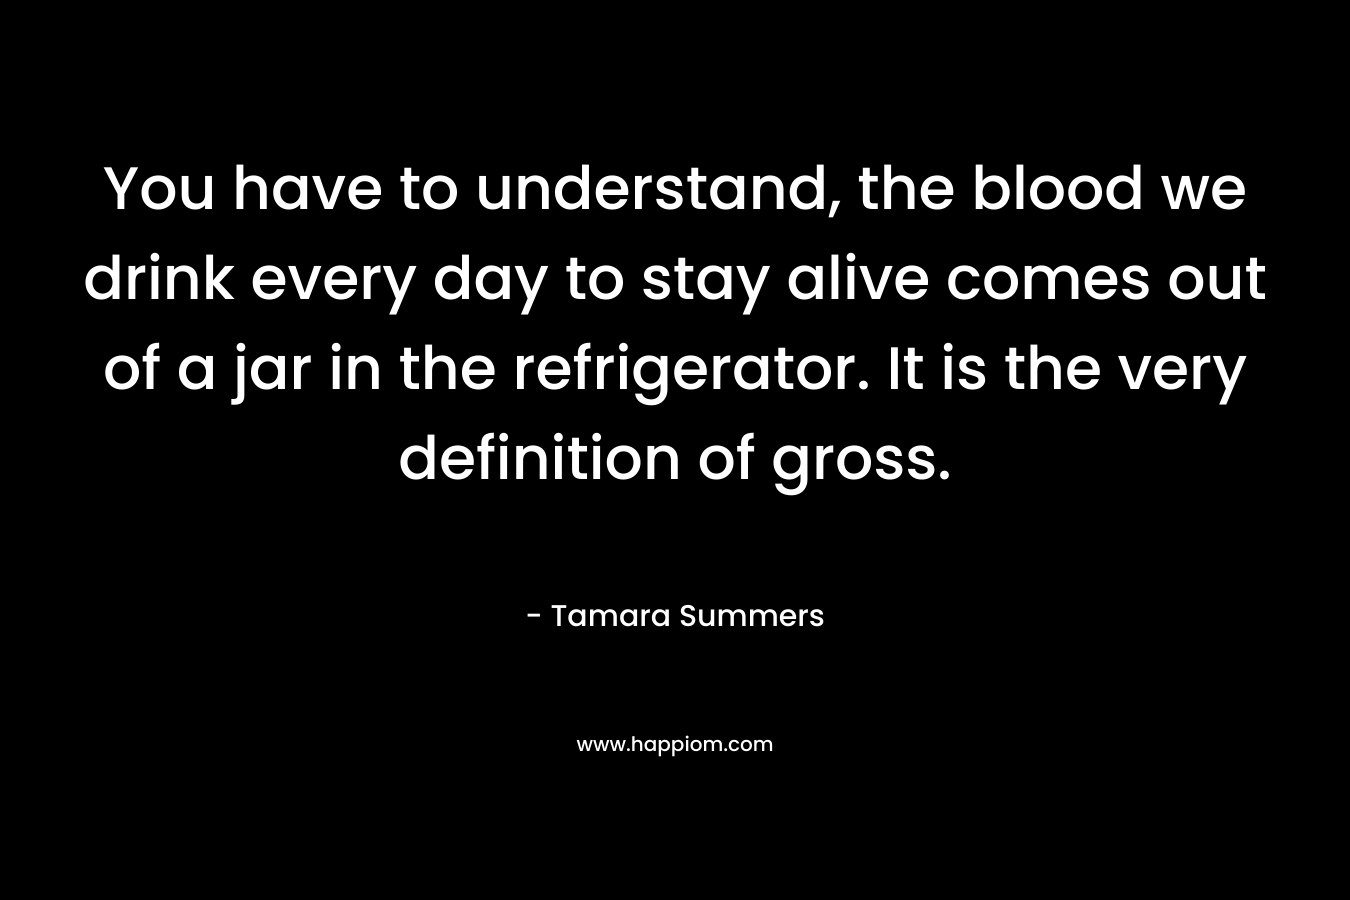 You have to understand, the blood we drink every day to stay alive comes out of a jar in the refrigerator. It is the very definition of gross. – Tamara Summers